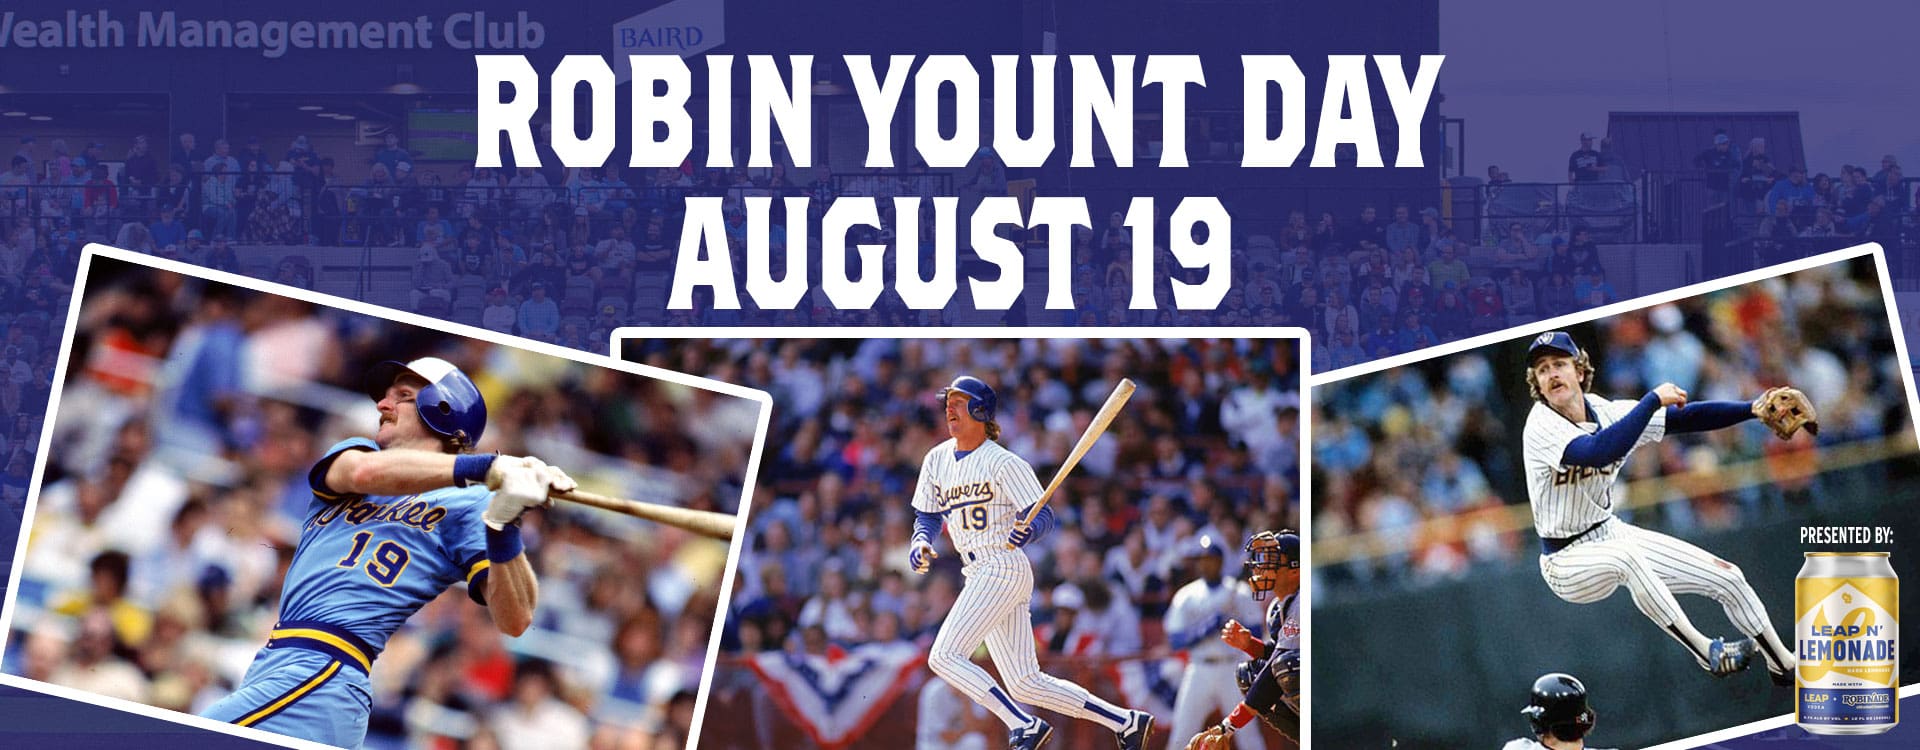 Robin Yount Day